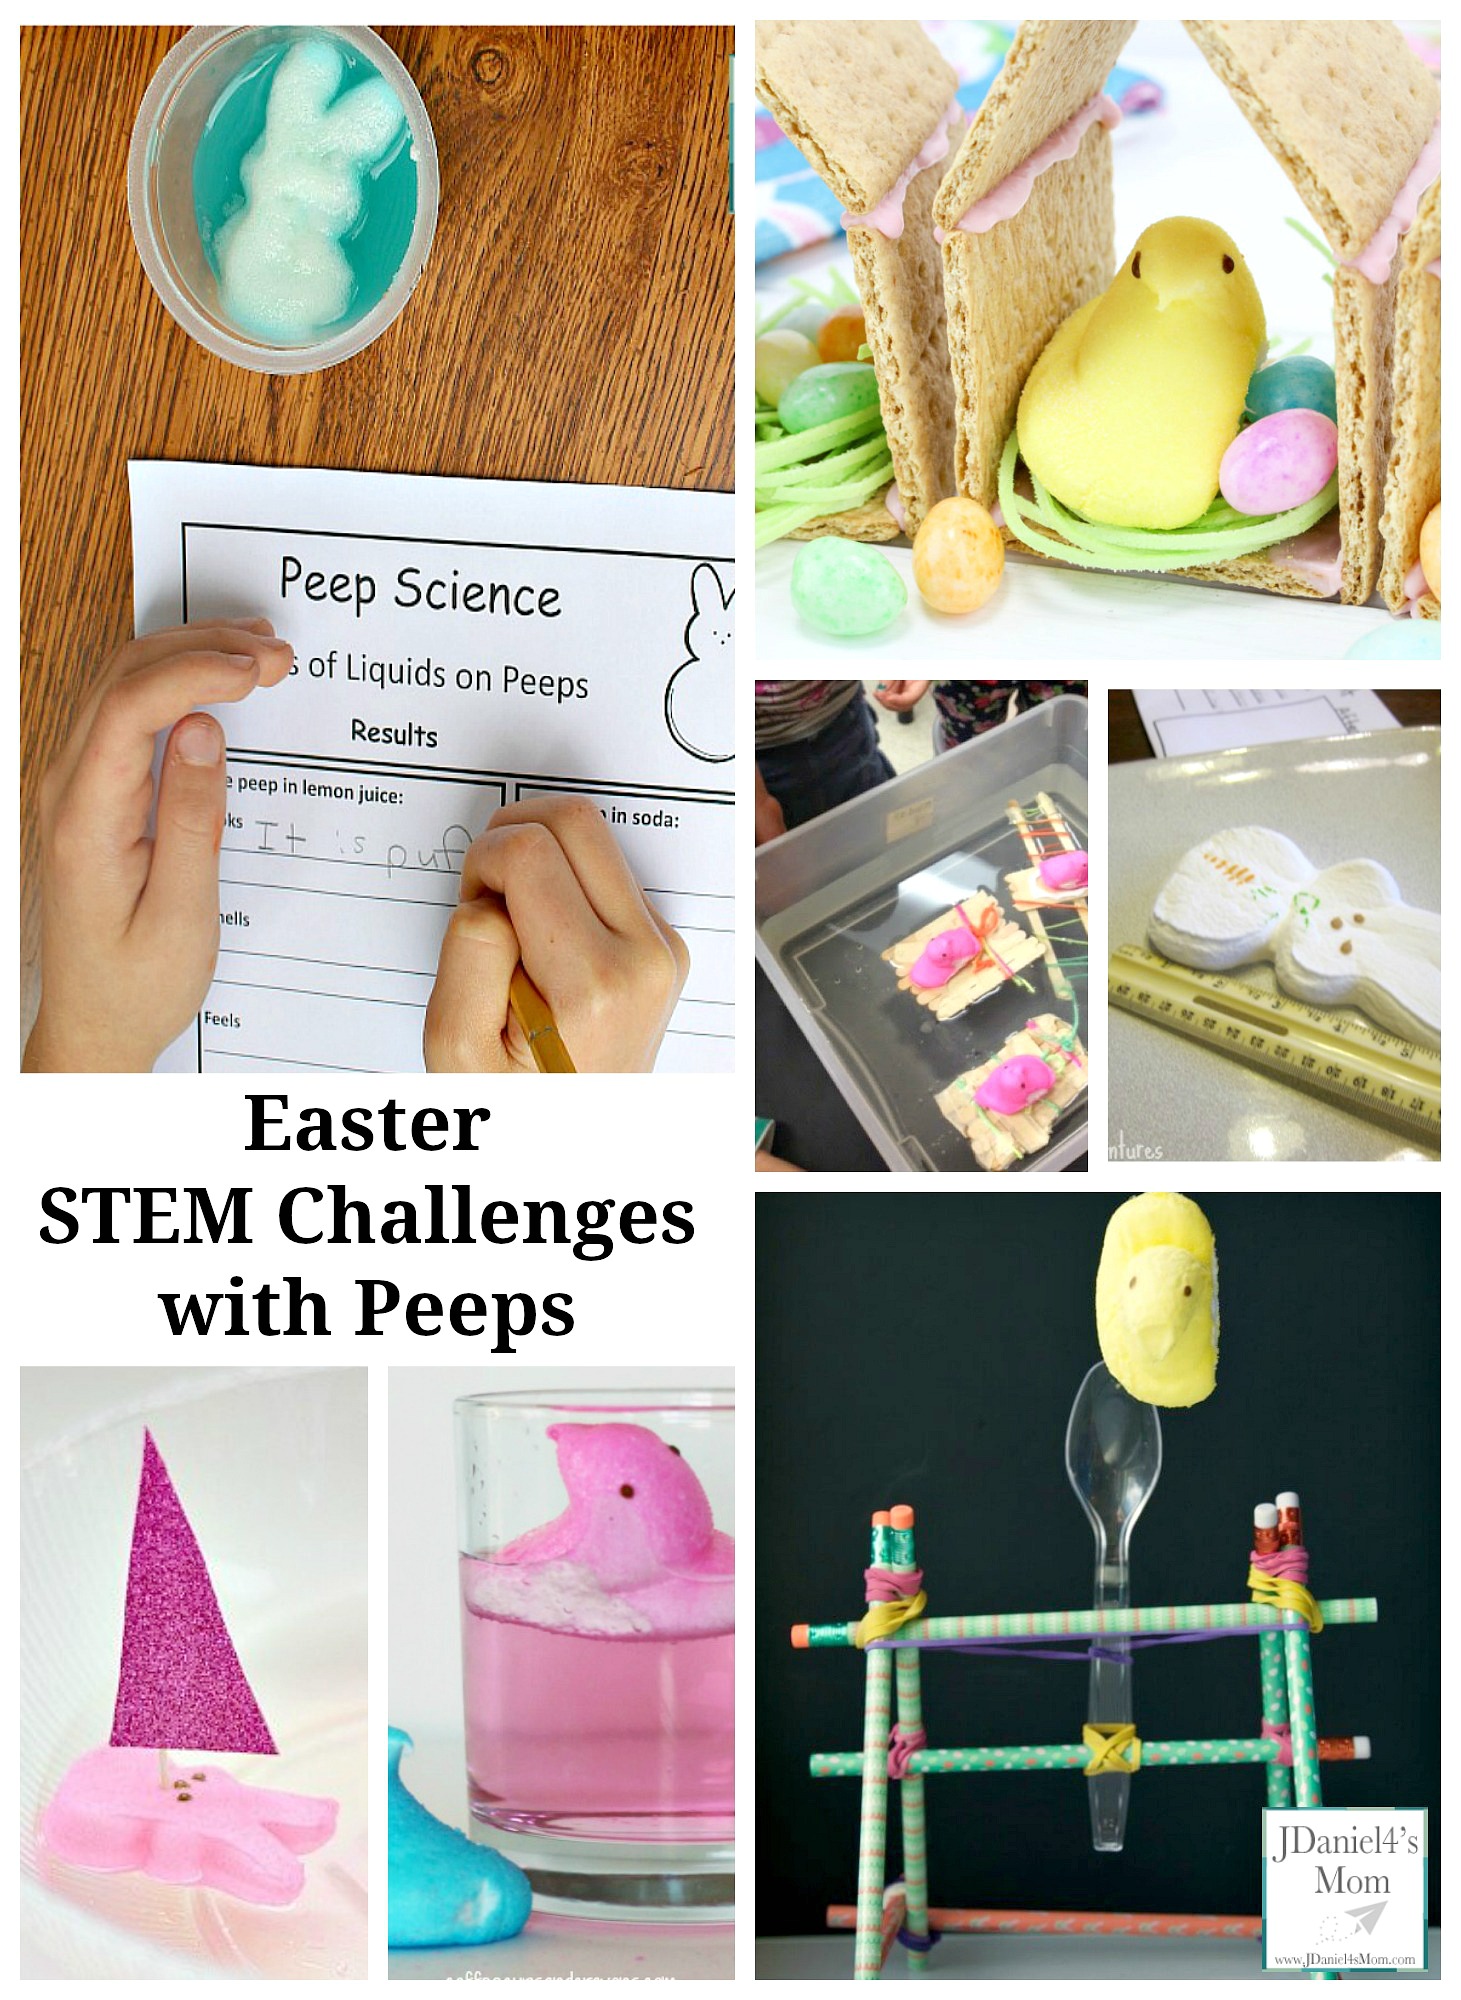 Your children at home and students at school will have fun exploring these Easter STEM challenges. Each challenge features Peeps!  #sinkorfloat #scienceexperiment #Peeps #STEM #buildingactivity #density #dissolving #jdaniel4smom #EasterChallenges